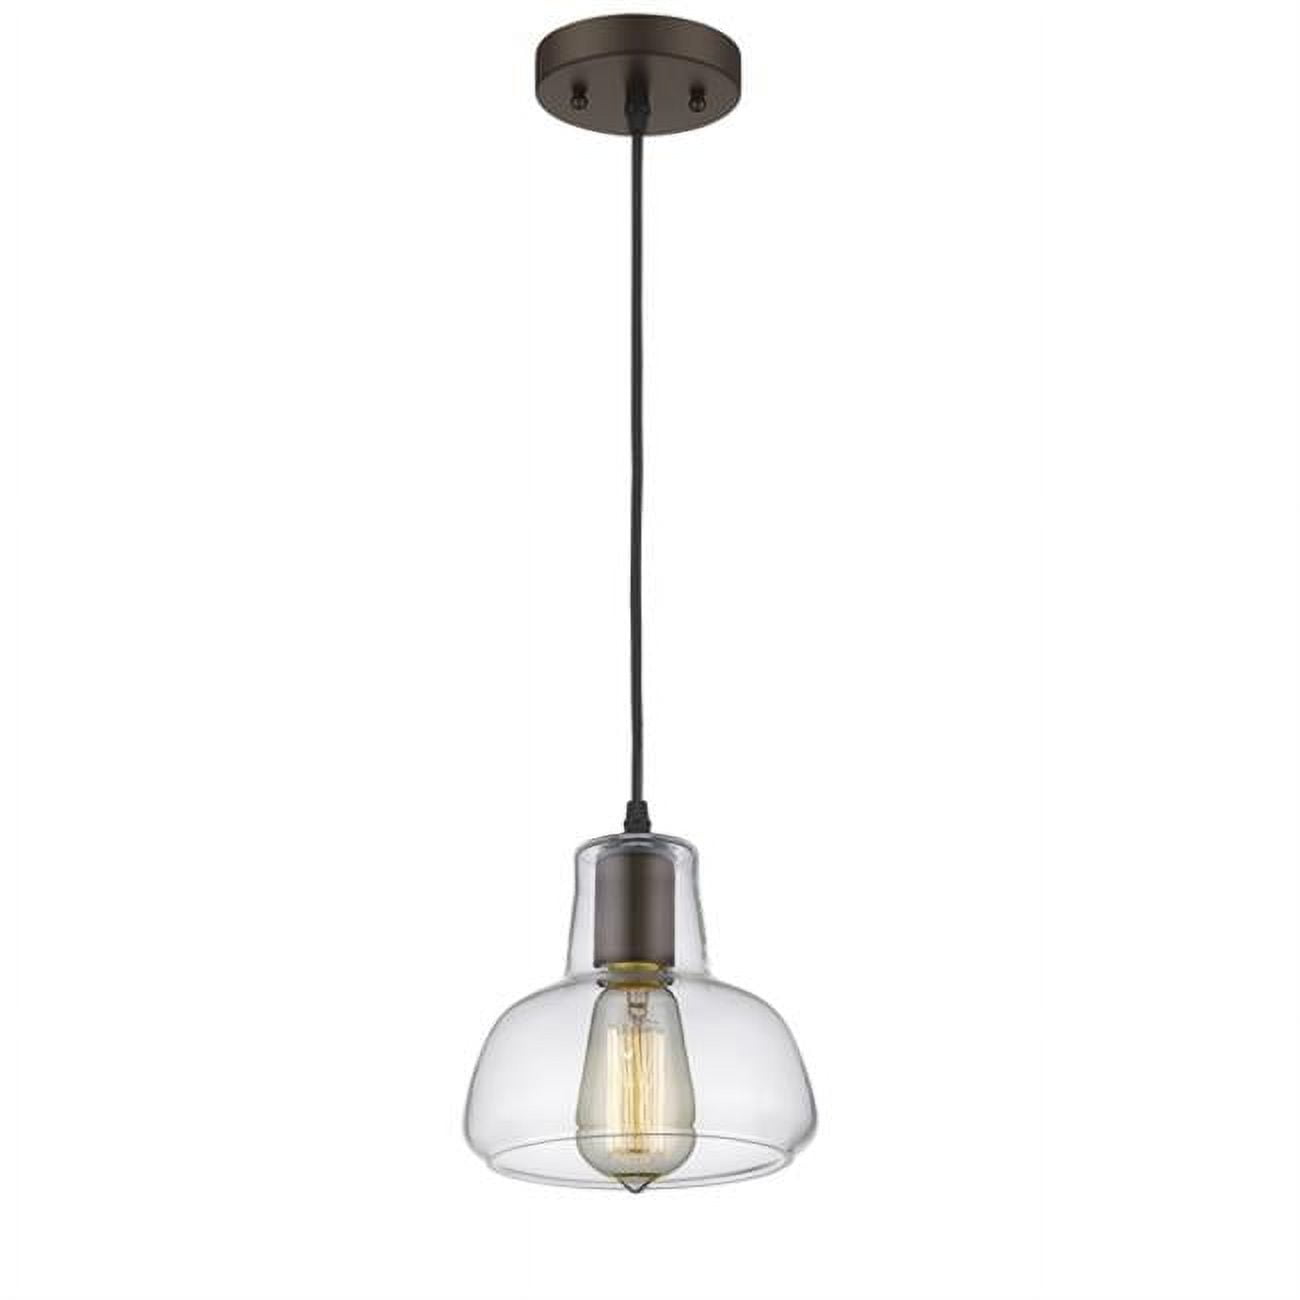 CH58011CL07-DP1 7 in. Shade Lighting Ironclad Industrial-Style 1 Light Rubbed Bronze Ceiling Mini Pendant - Oil Rubbed Bronze -  Chloe